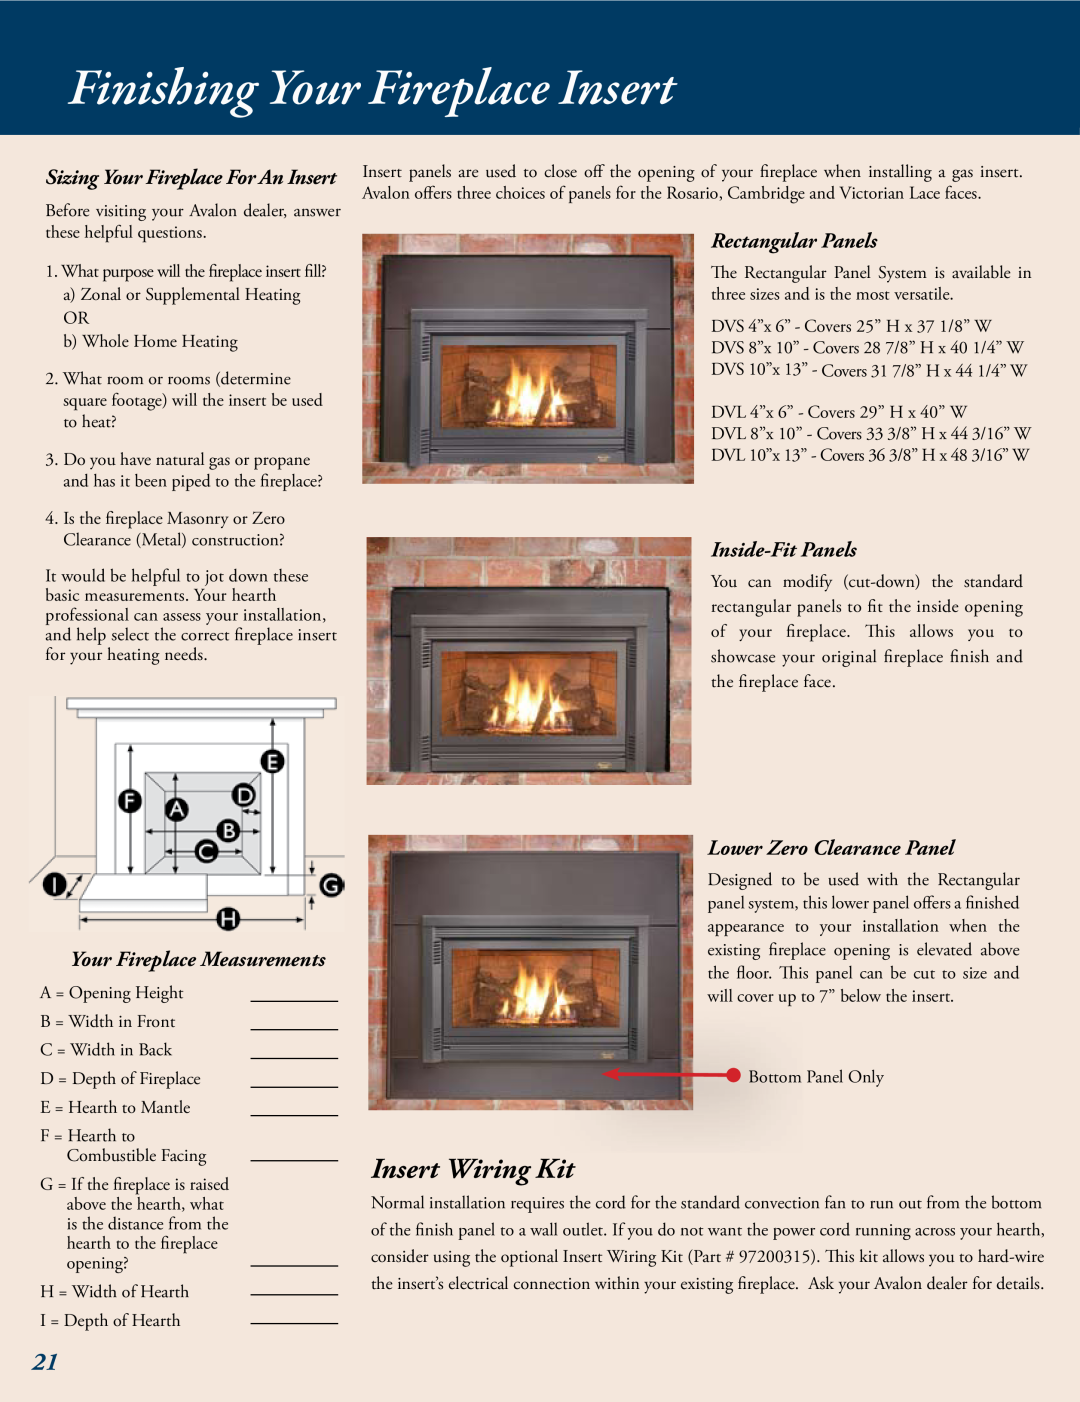 Avalon Stoves Gas Stove & Fireplace manual Finishing Your Fireplace Insert, Insert Wiring Kit 